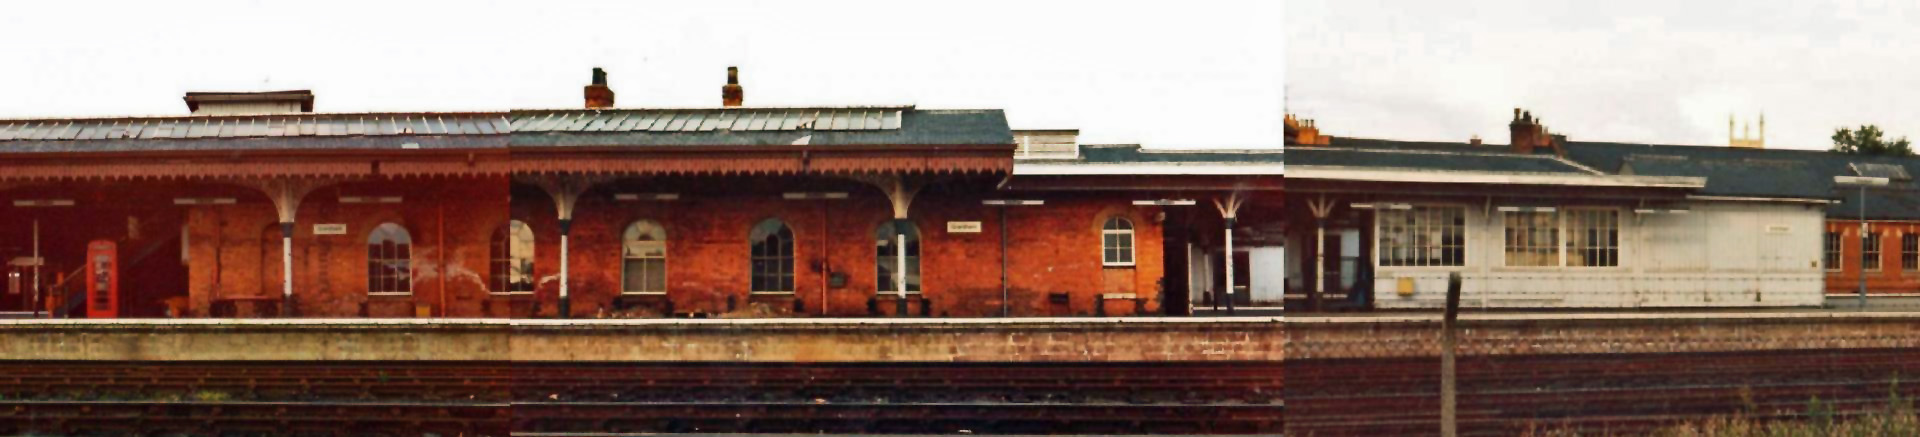 A composite view of the south end of the main range of buildings on the western platform. Photograph lent by Roy Vinter.